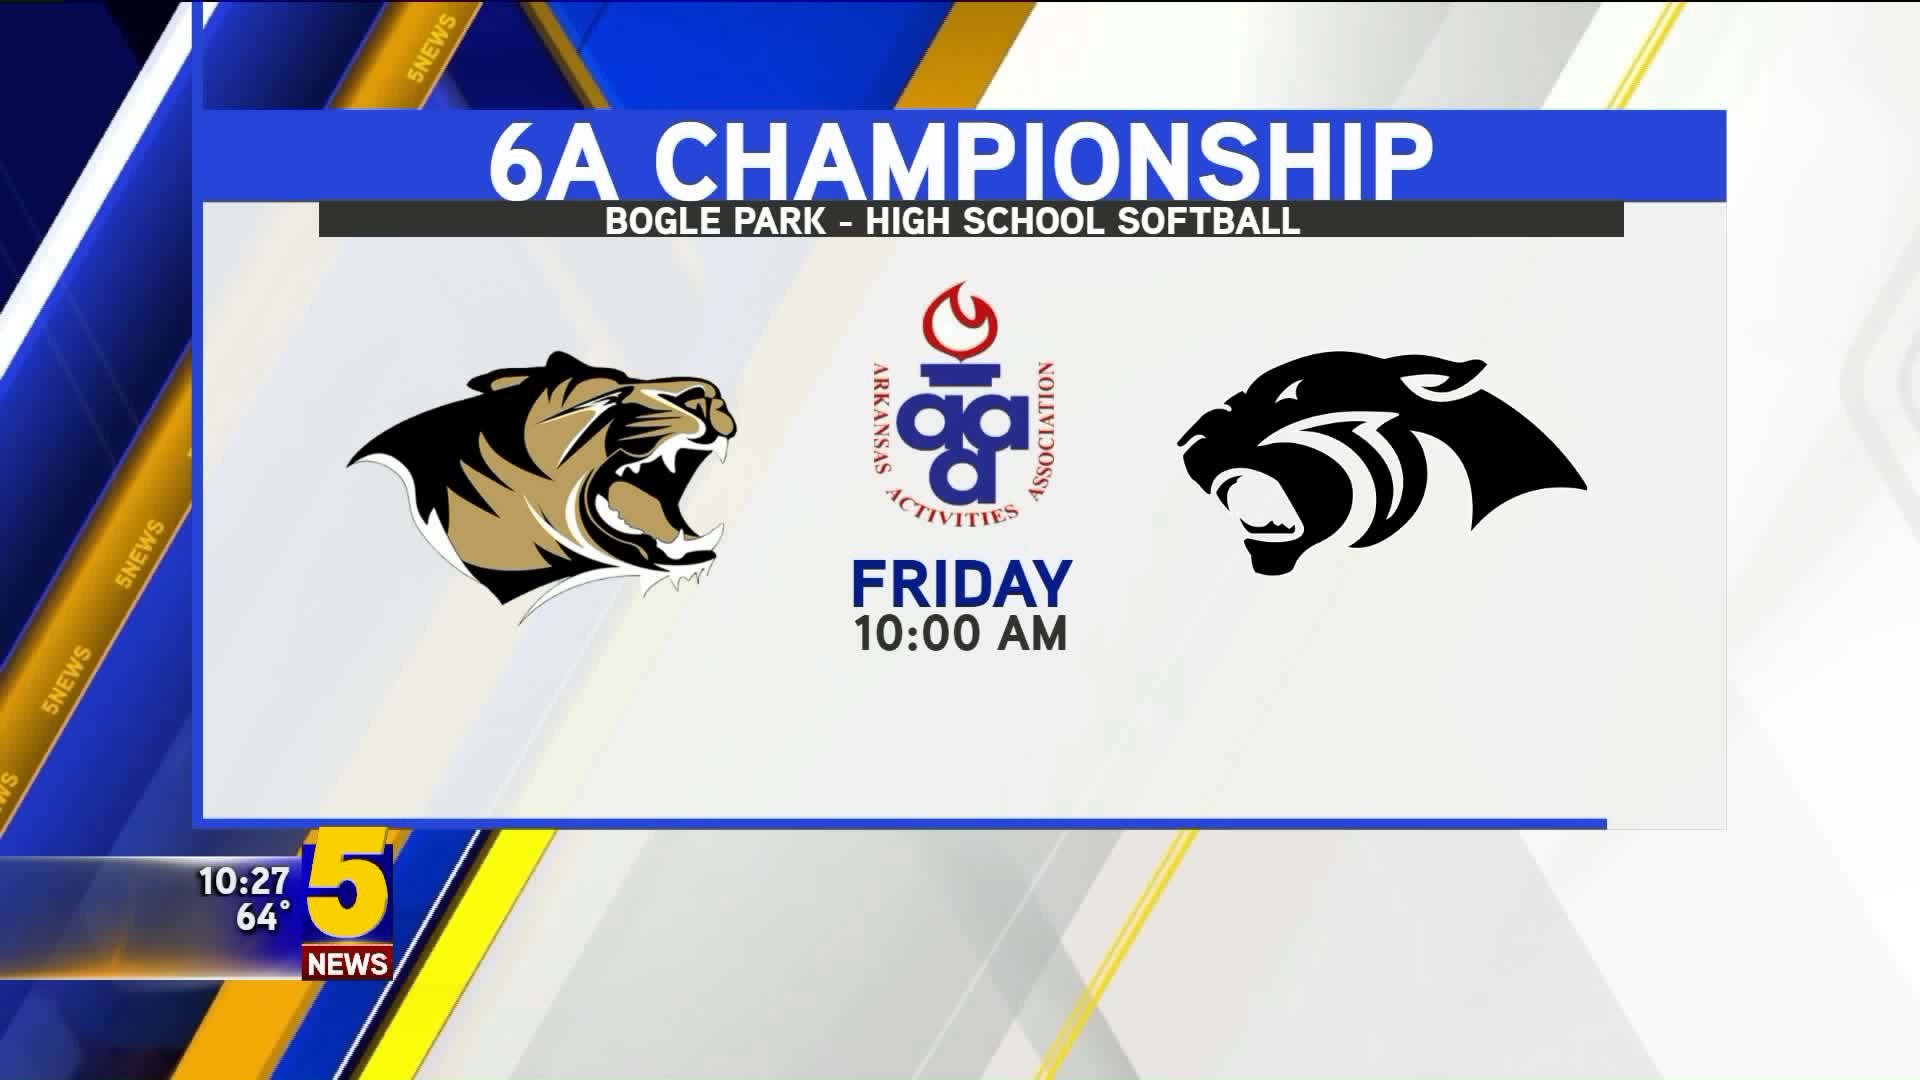 Bentonville aiming for record 4th straight title